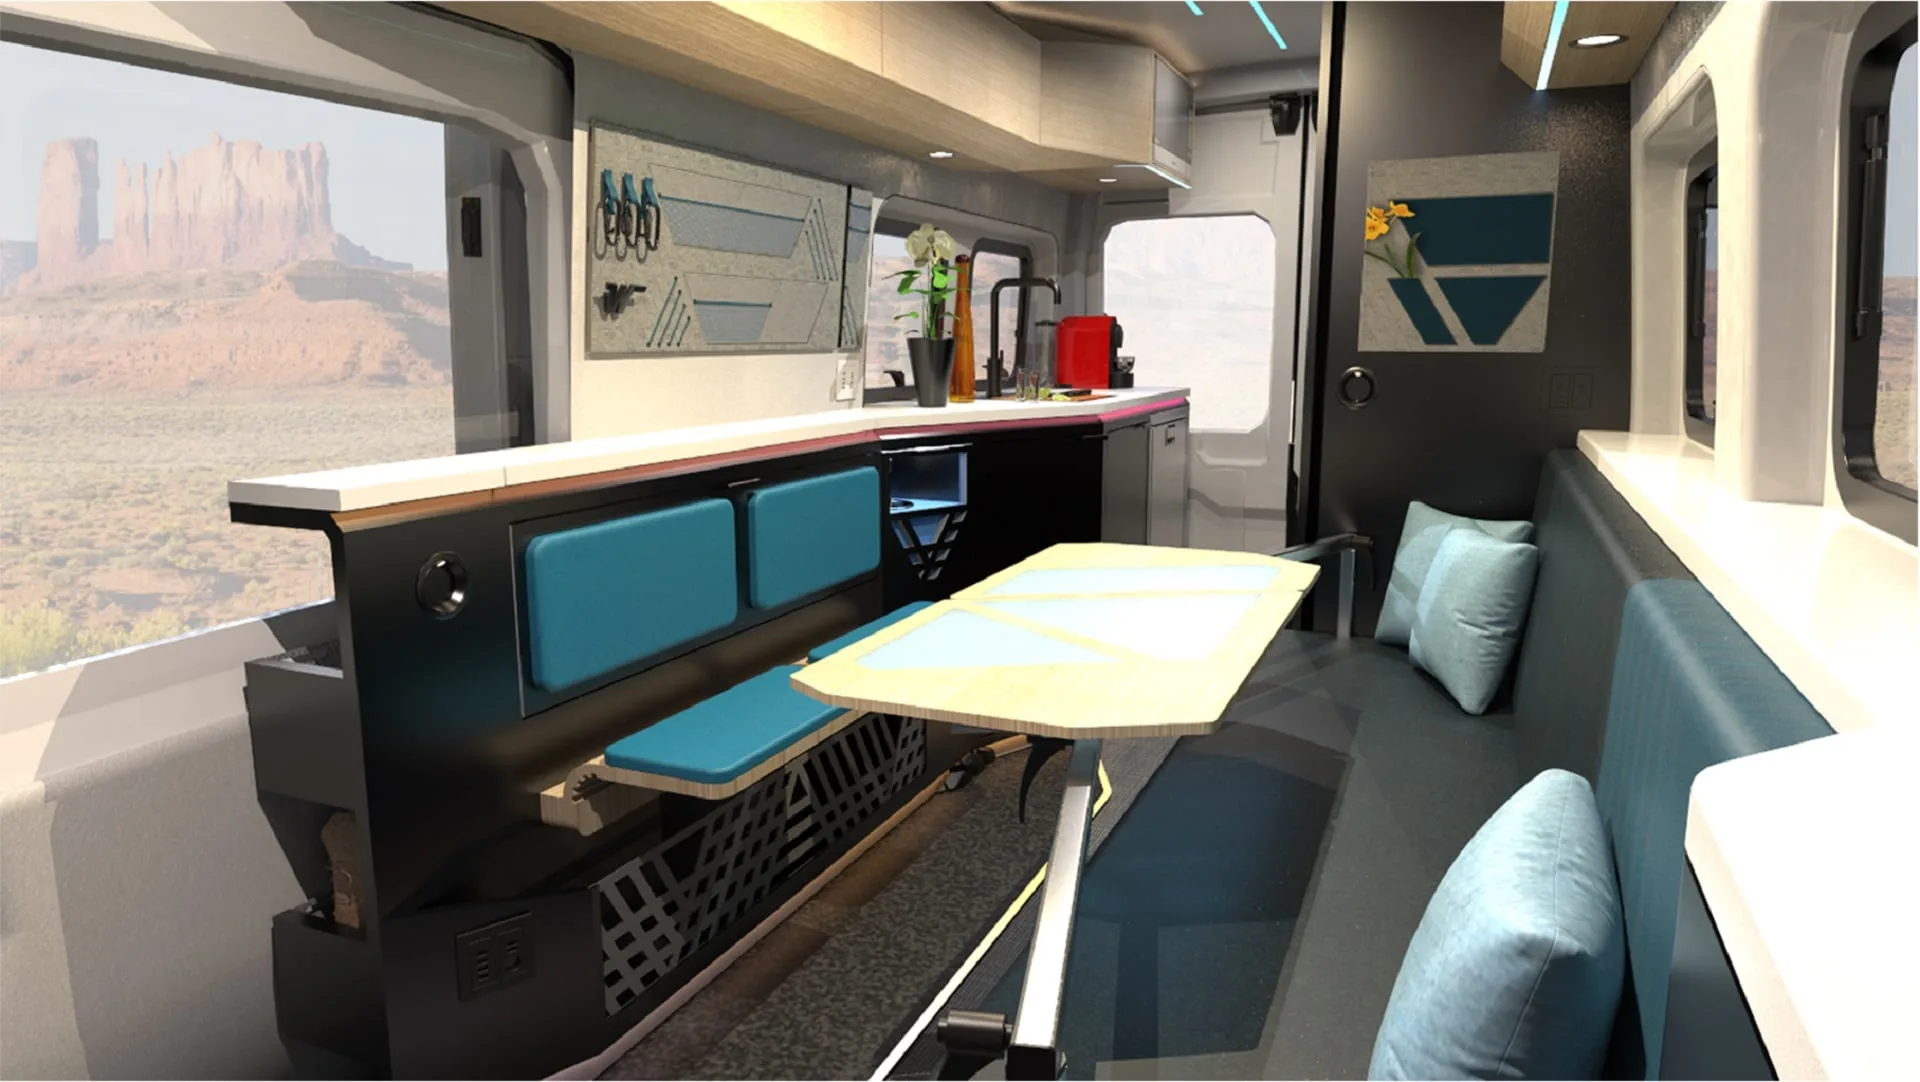 A photo of the interior of the Winnebago electric RV